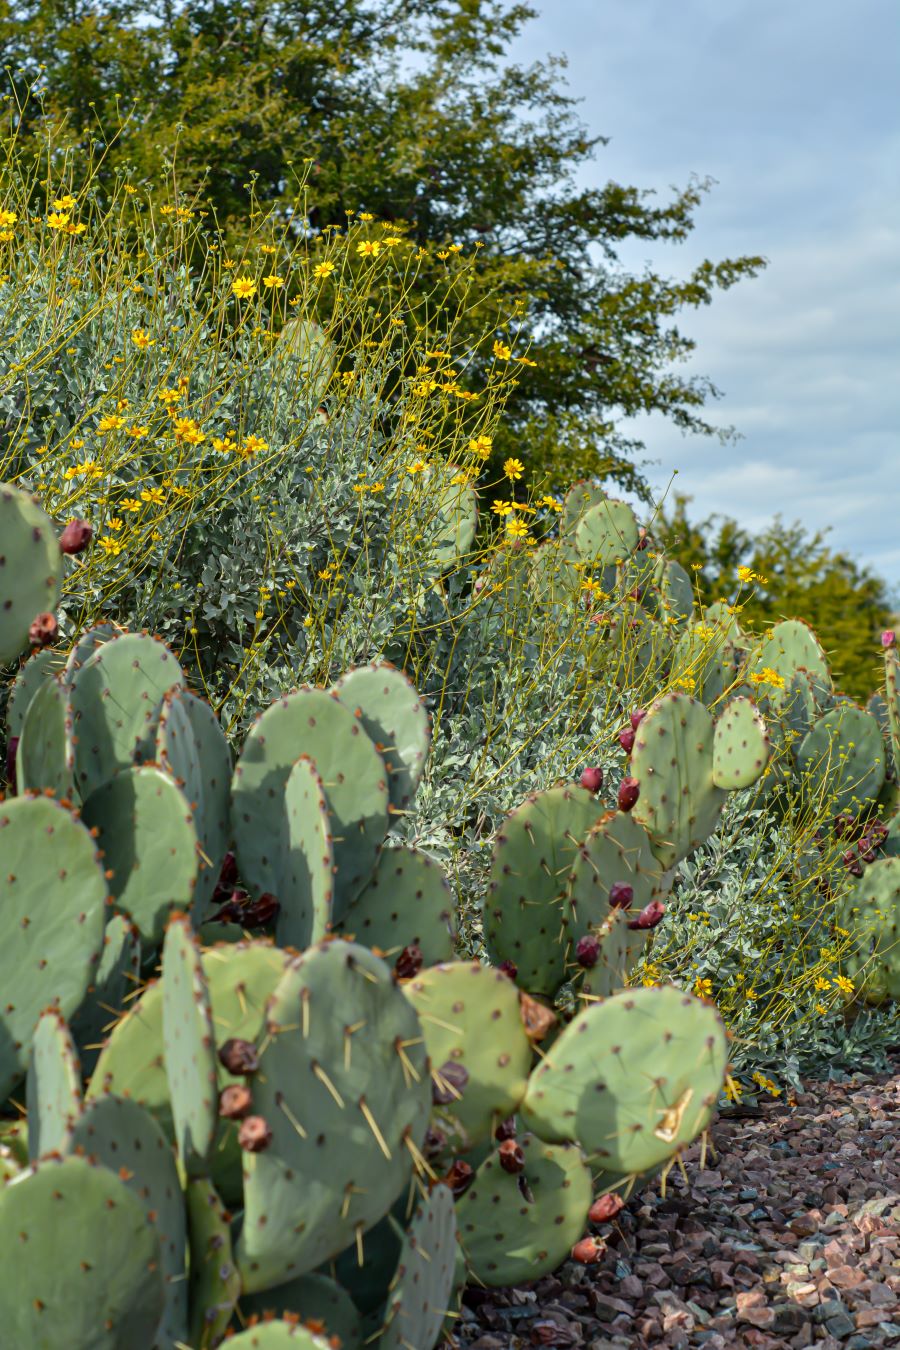 A close-up of a prickly pear cactus and some little yellow flowers.